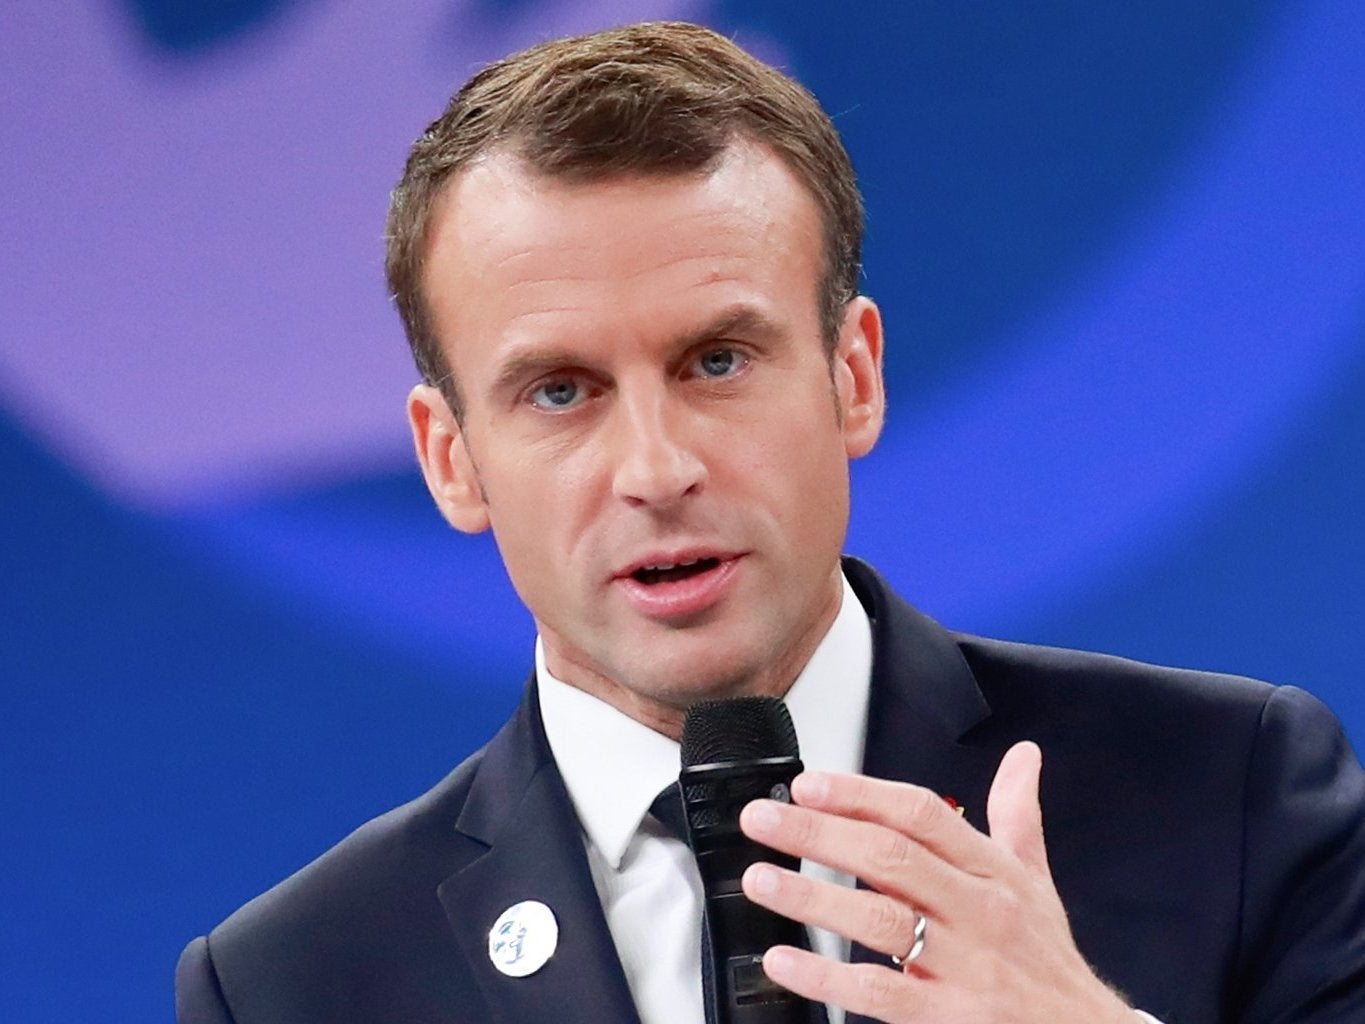 The French president needs to change both his style and policy priorities